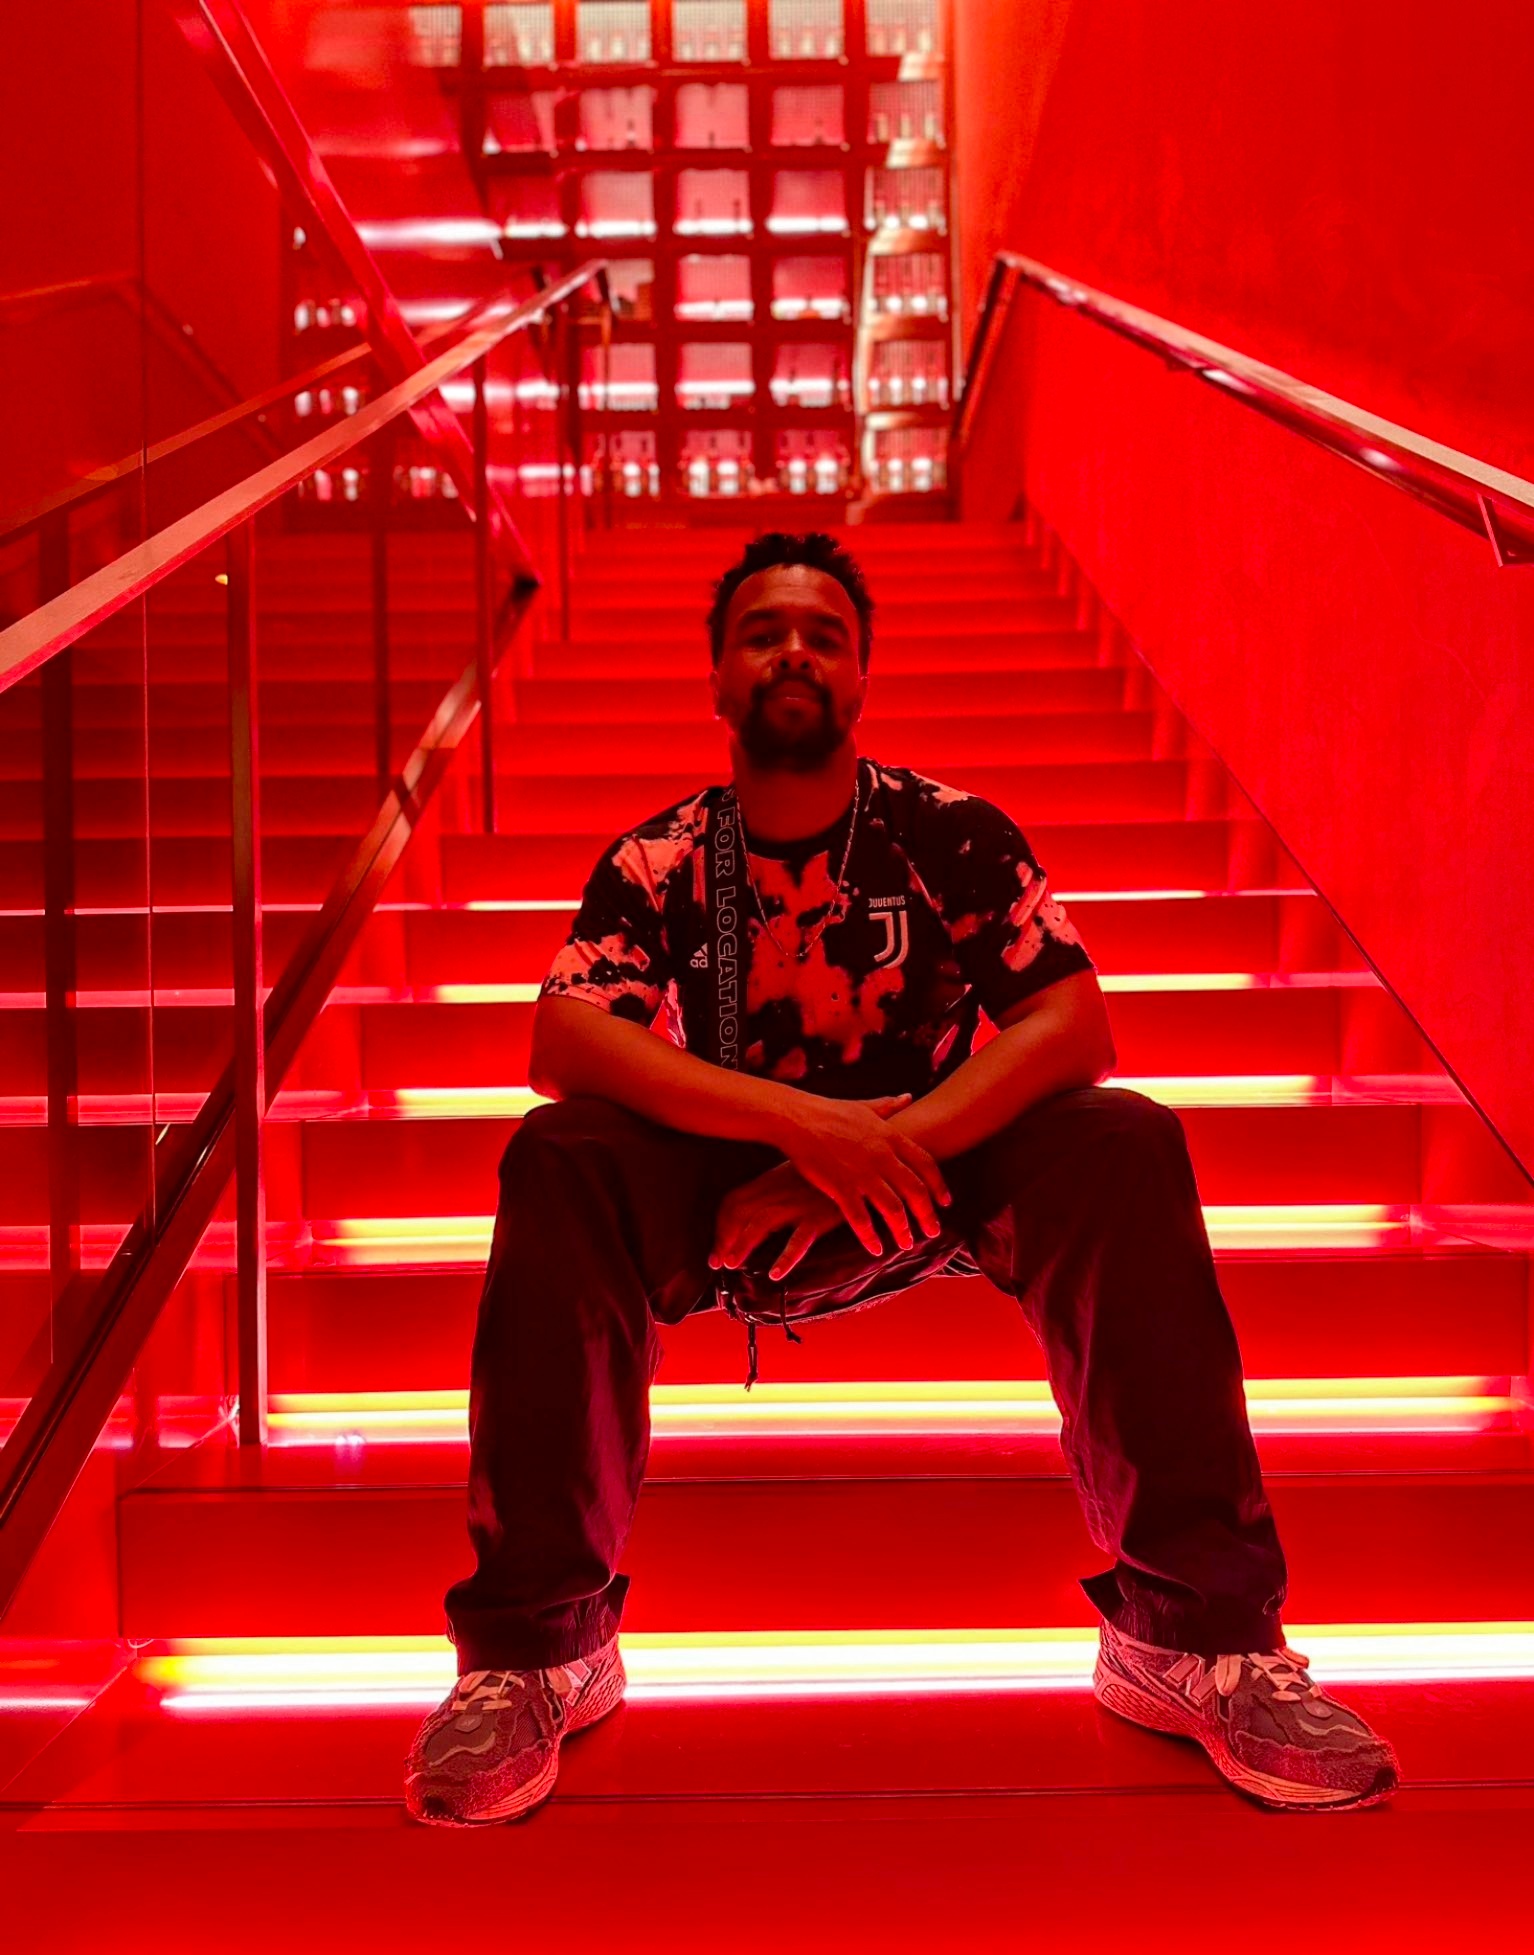 A Black man sits on a staircase suffused with red atmospheric light. He looks at us from slightly above on the stairs where he sits with hands crossed over his legs. He wears a floral print shirt, pants, and sneakers.